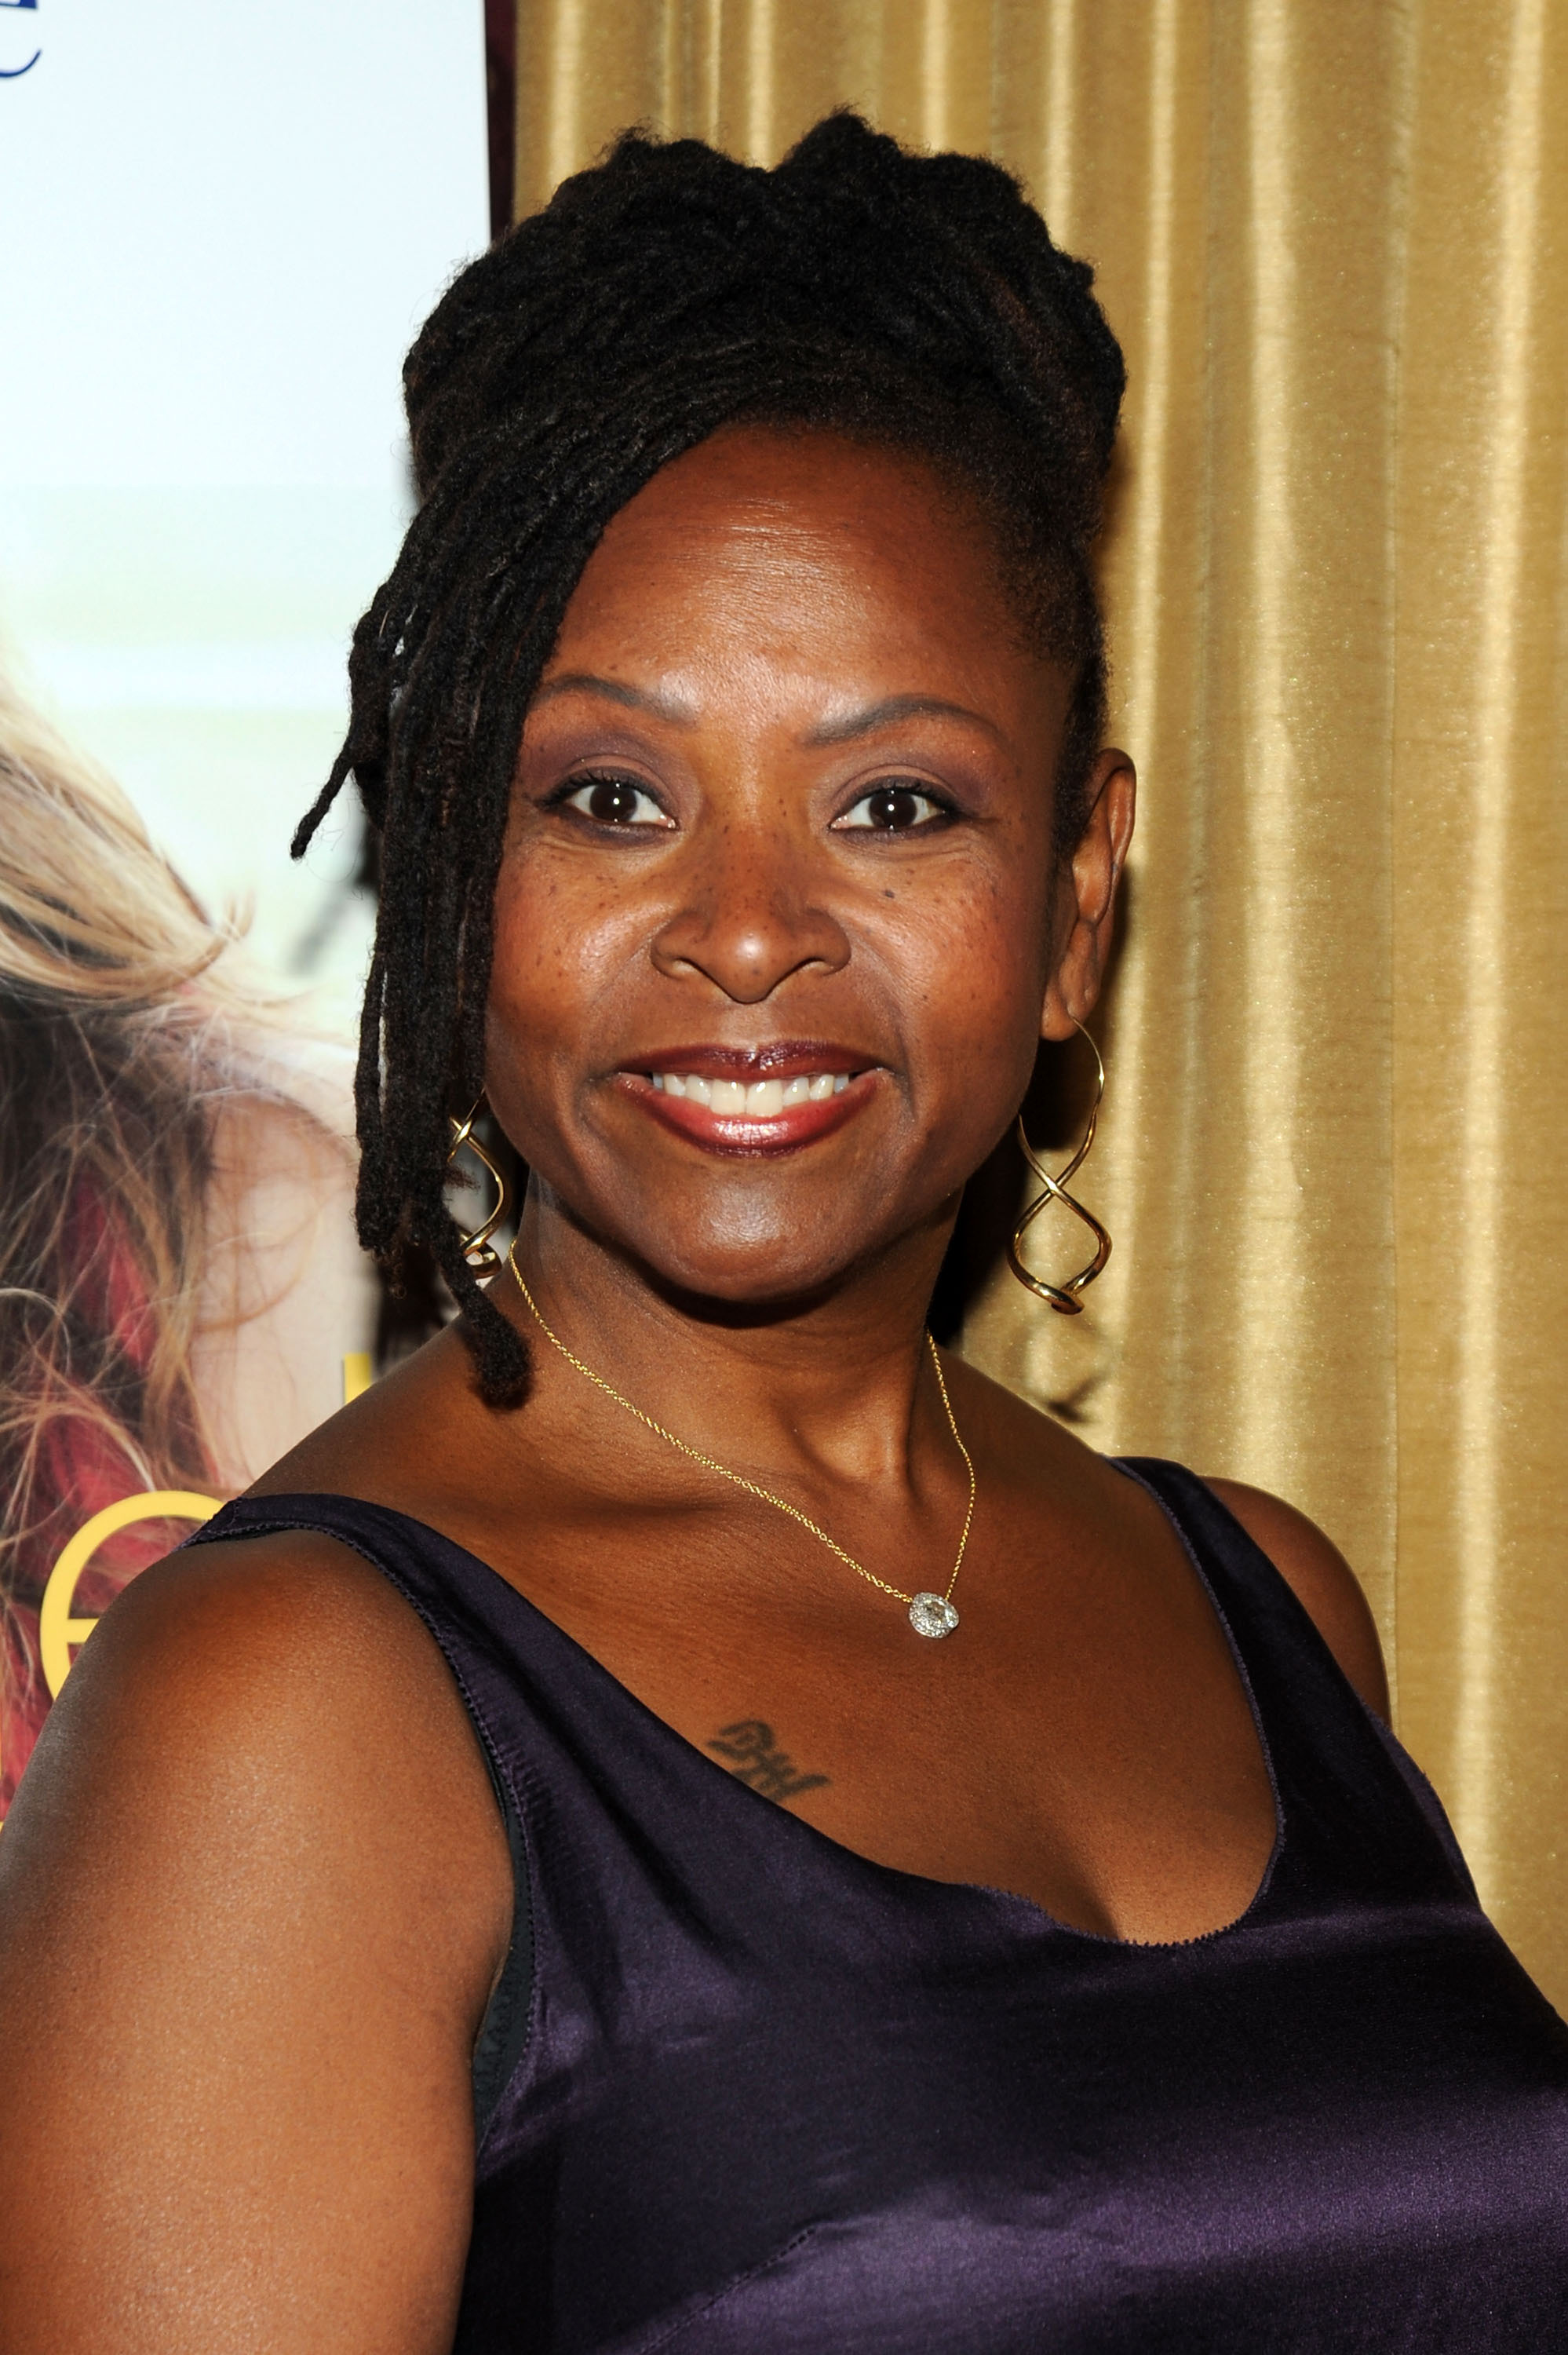 List of quotation by Robin Quivers. 